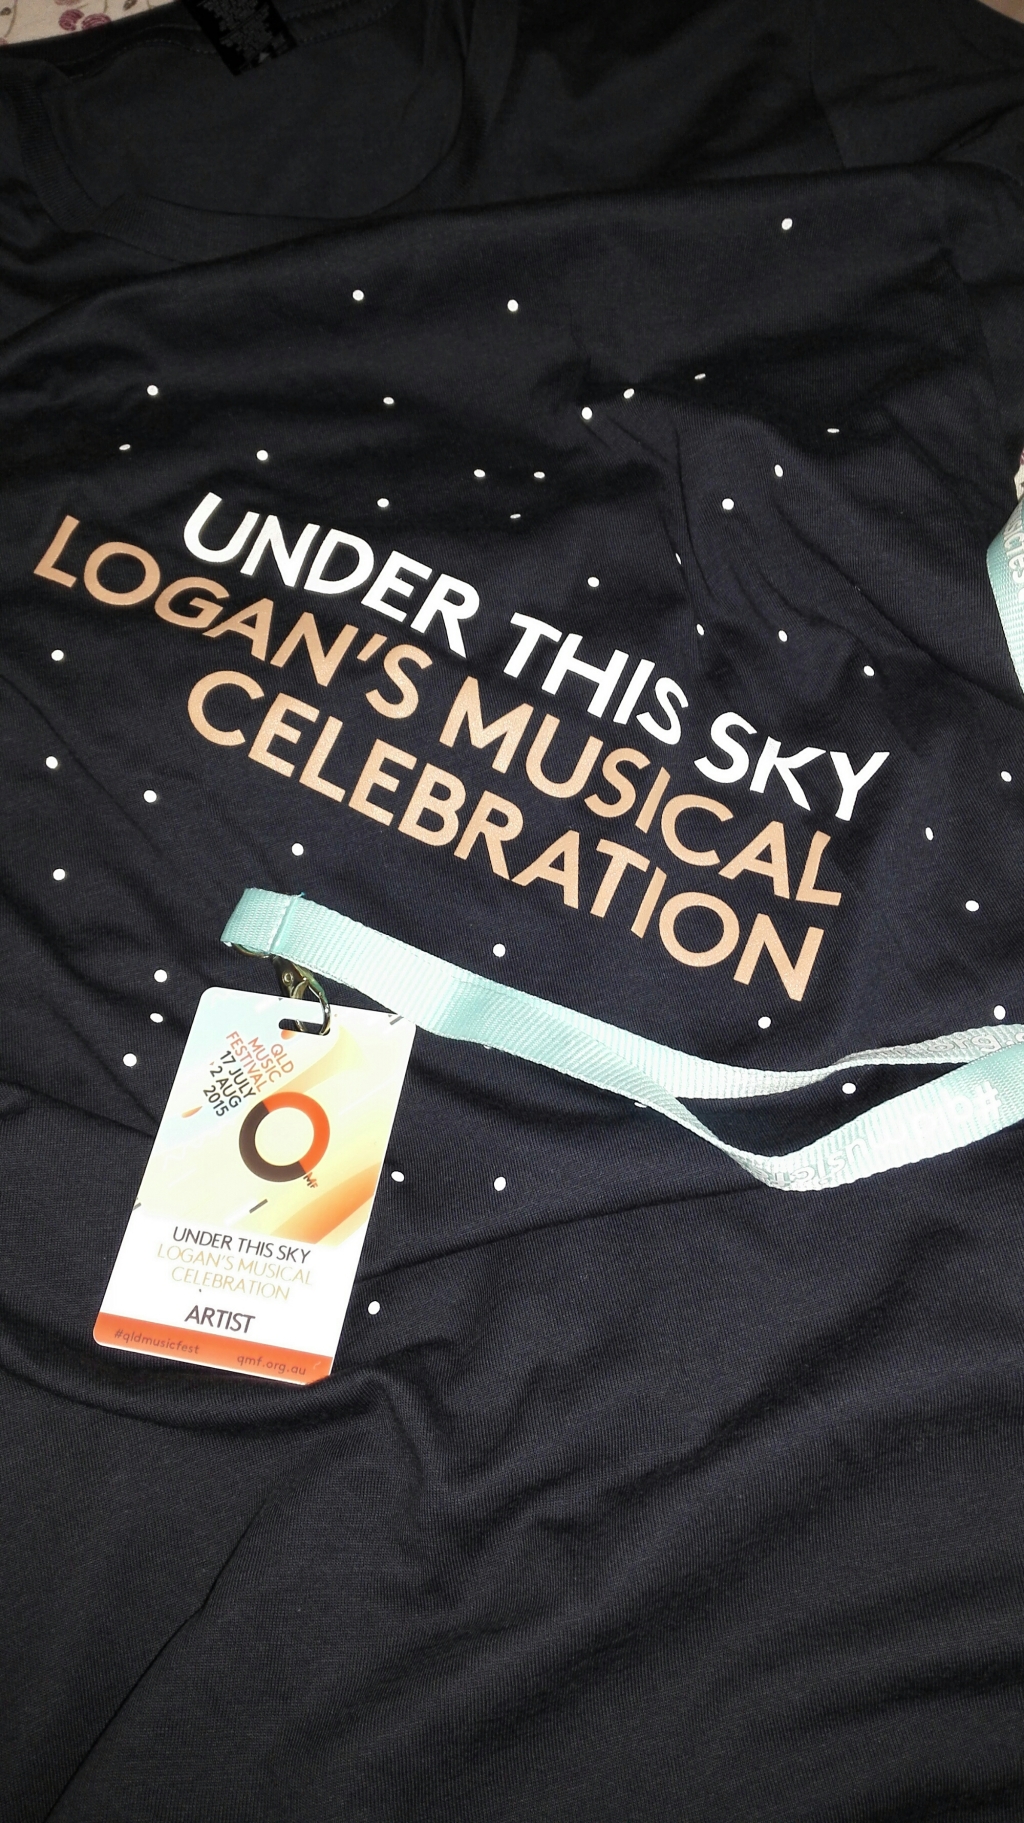 Festival pass and a t-shirt